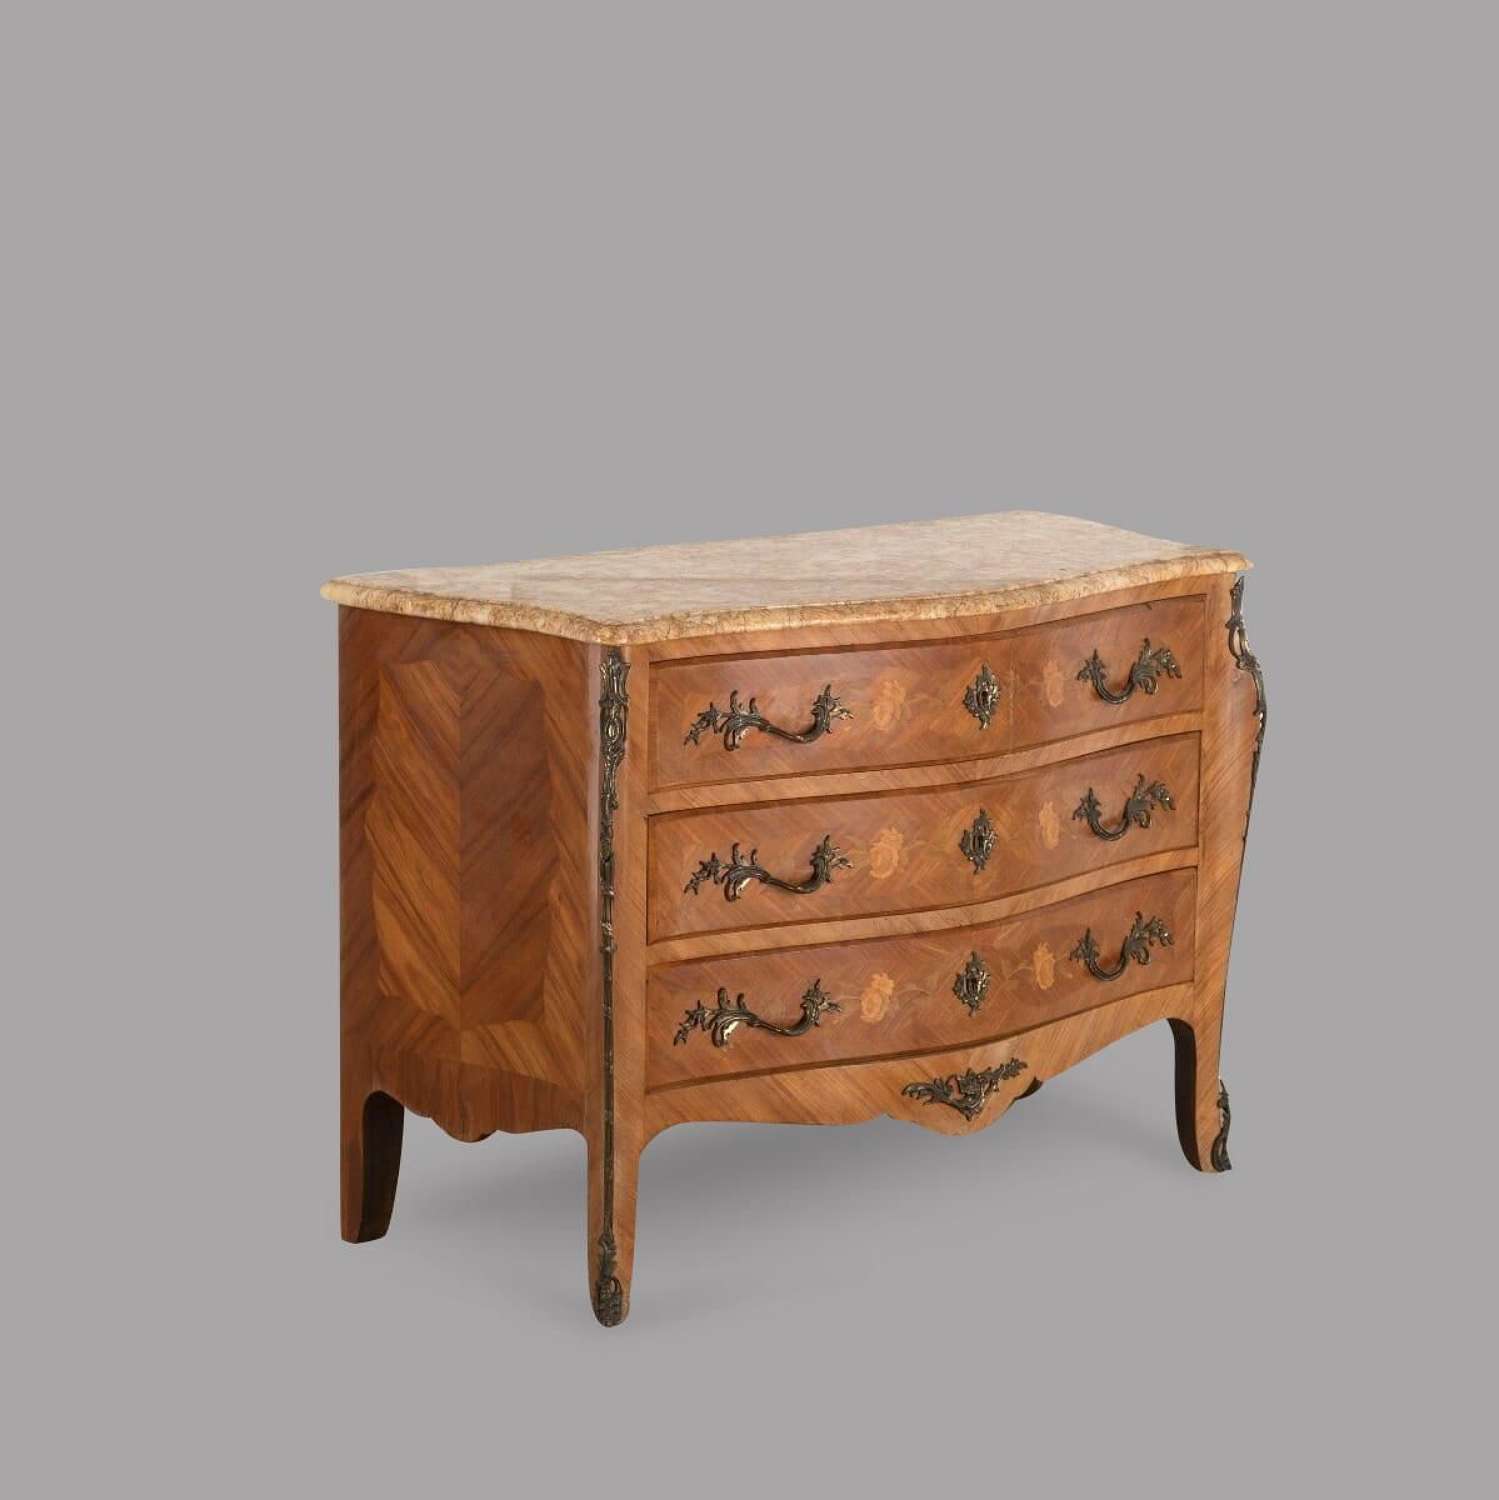 19th Century French Fruitwood Parquetry Inlay Commode